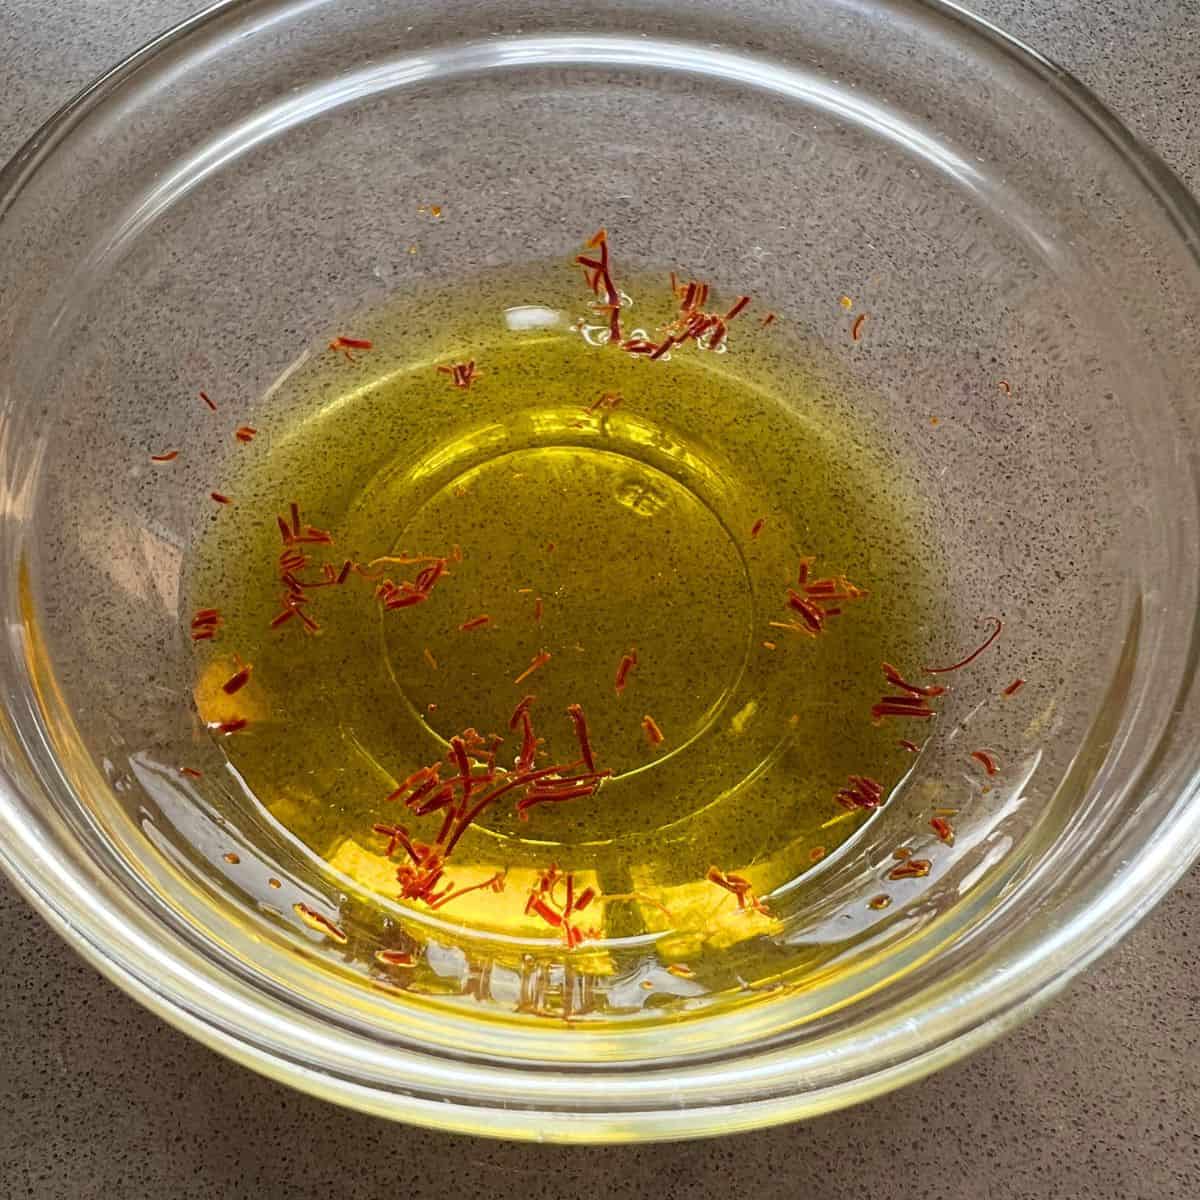 Small glass bowl with crushed strands of saffron in water.